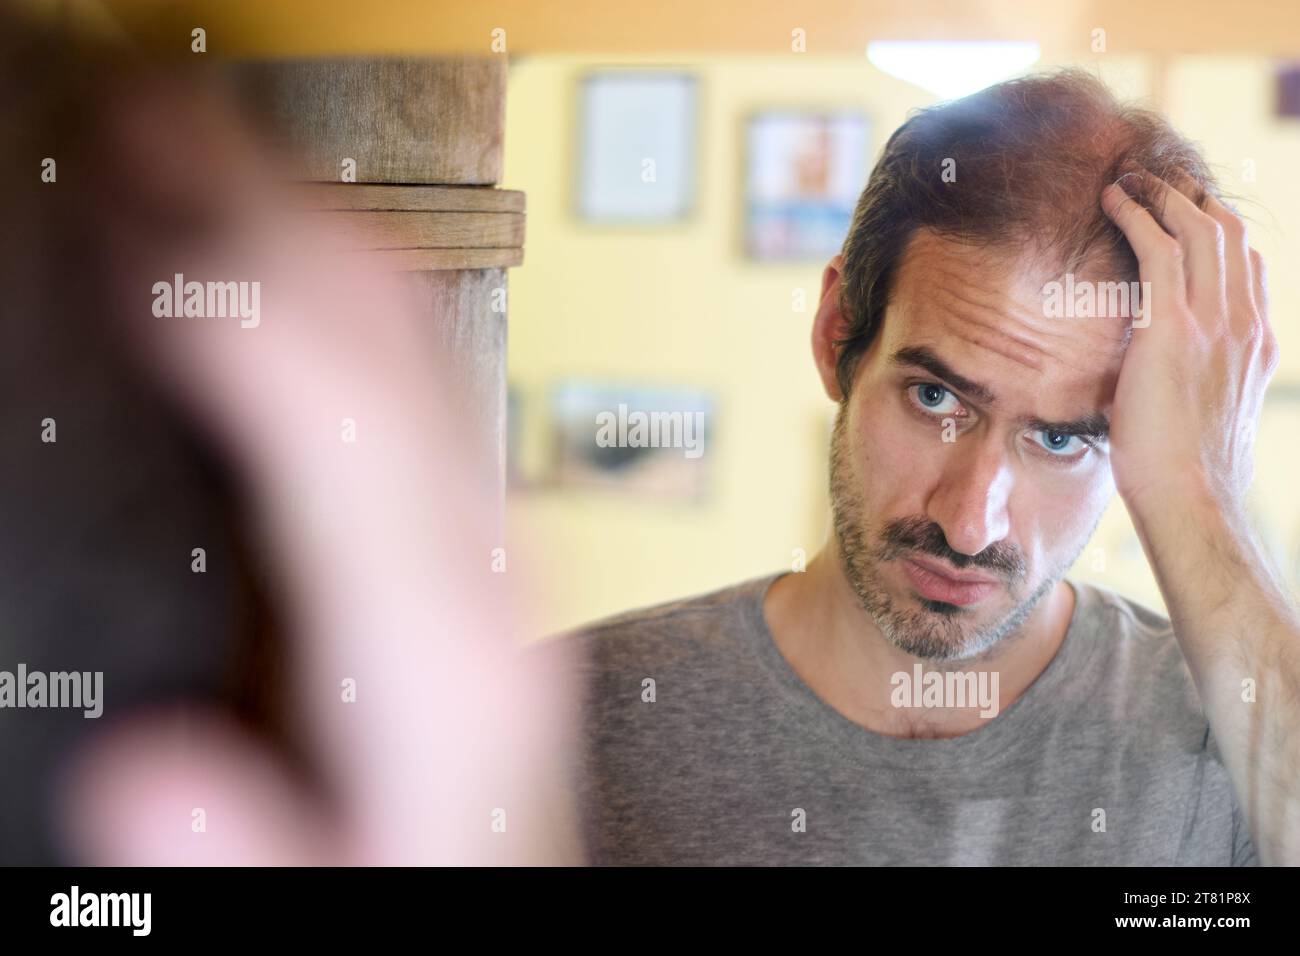 Young 30 year old caucasian man with short beard looking at his reflection in the mirror while touching his head, worried about hair loss. Copy space Stock Photo